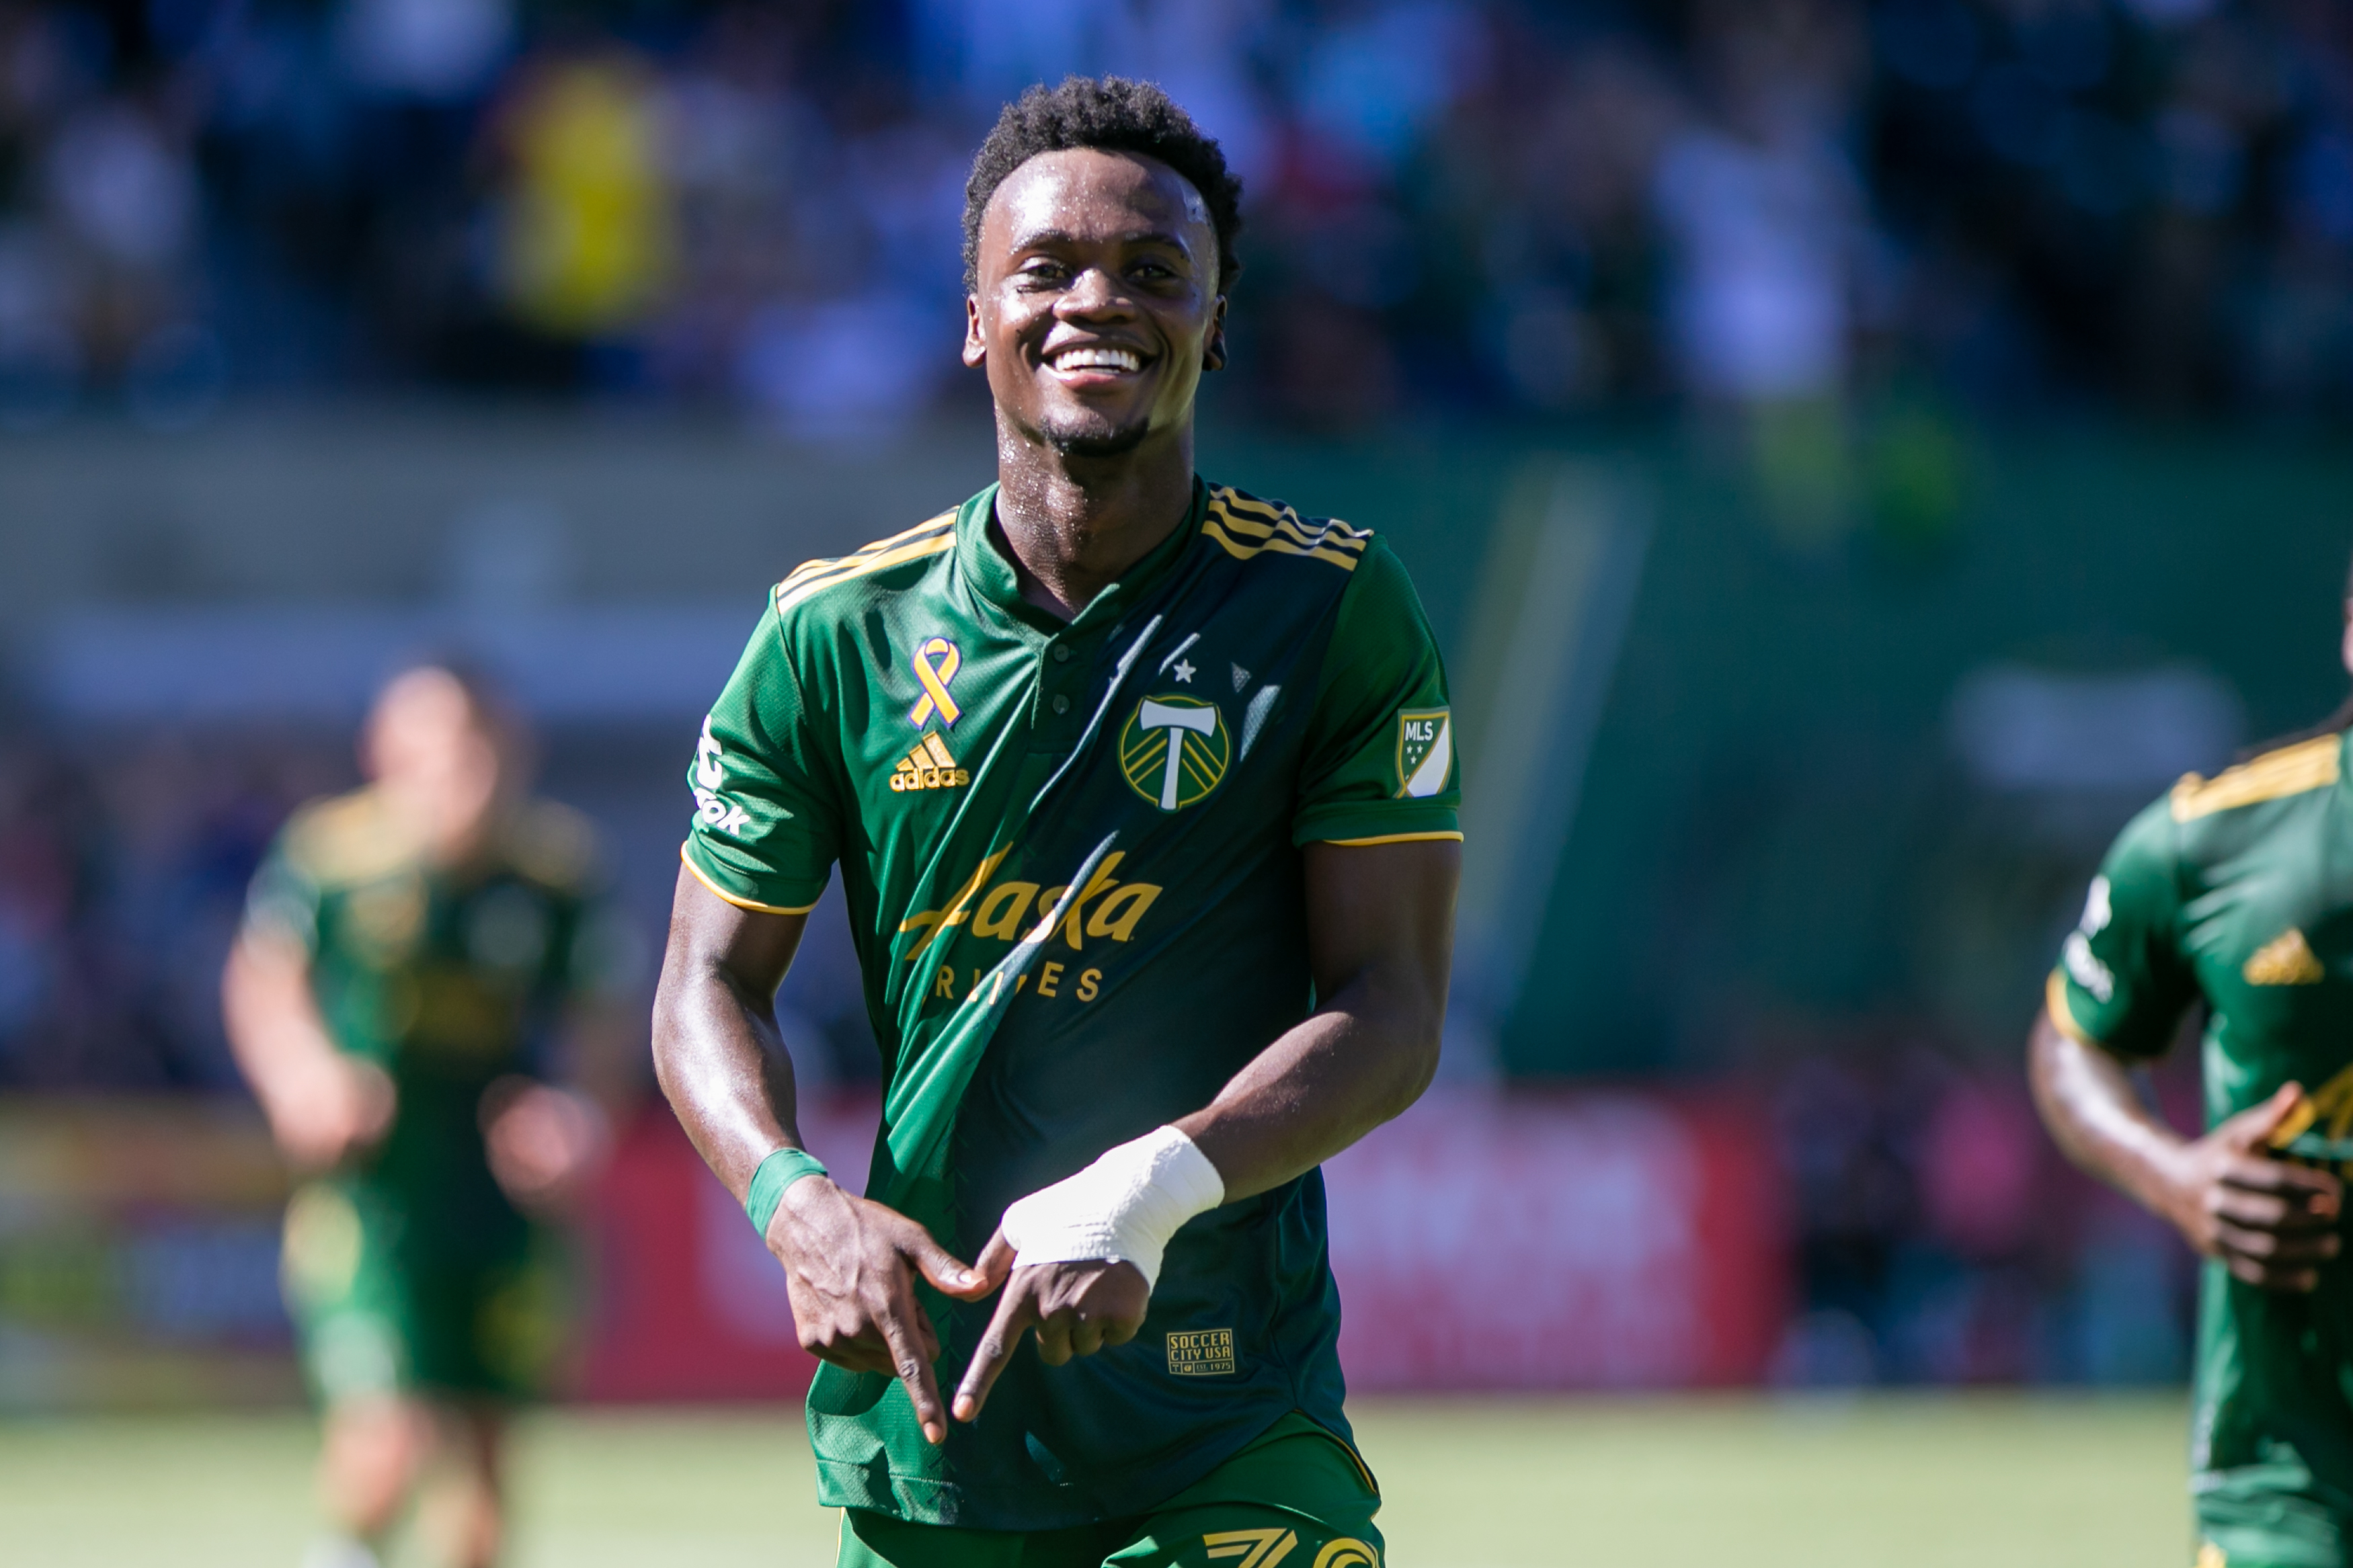 Miracle' Santiago Moreno building on a breakout season with Portland Timbers - oregonlive.com